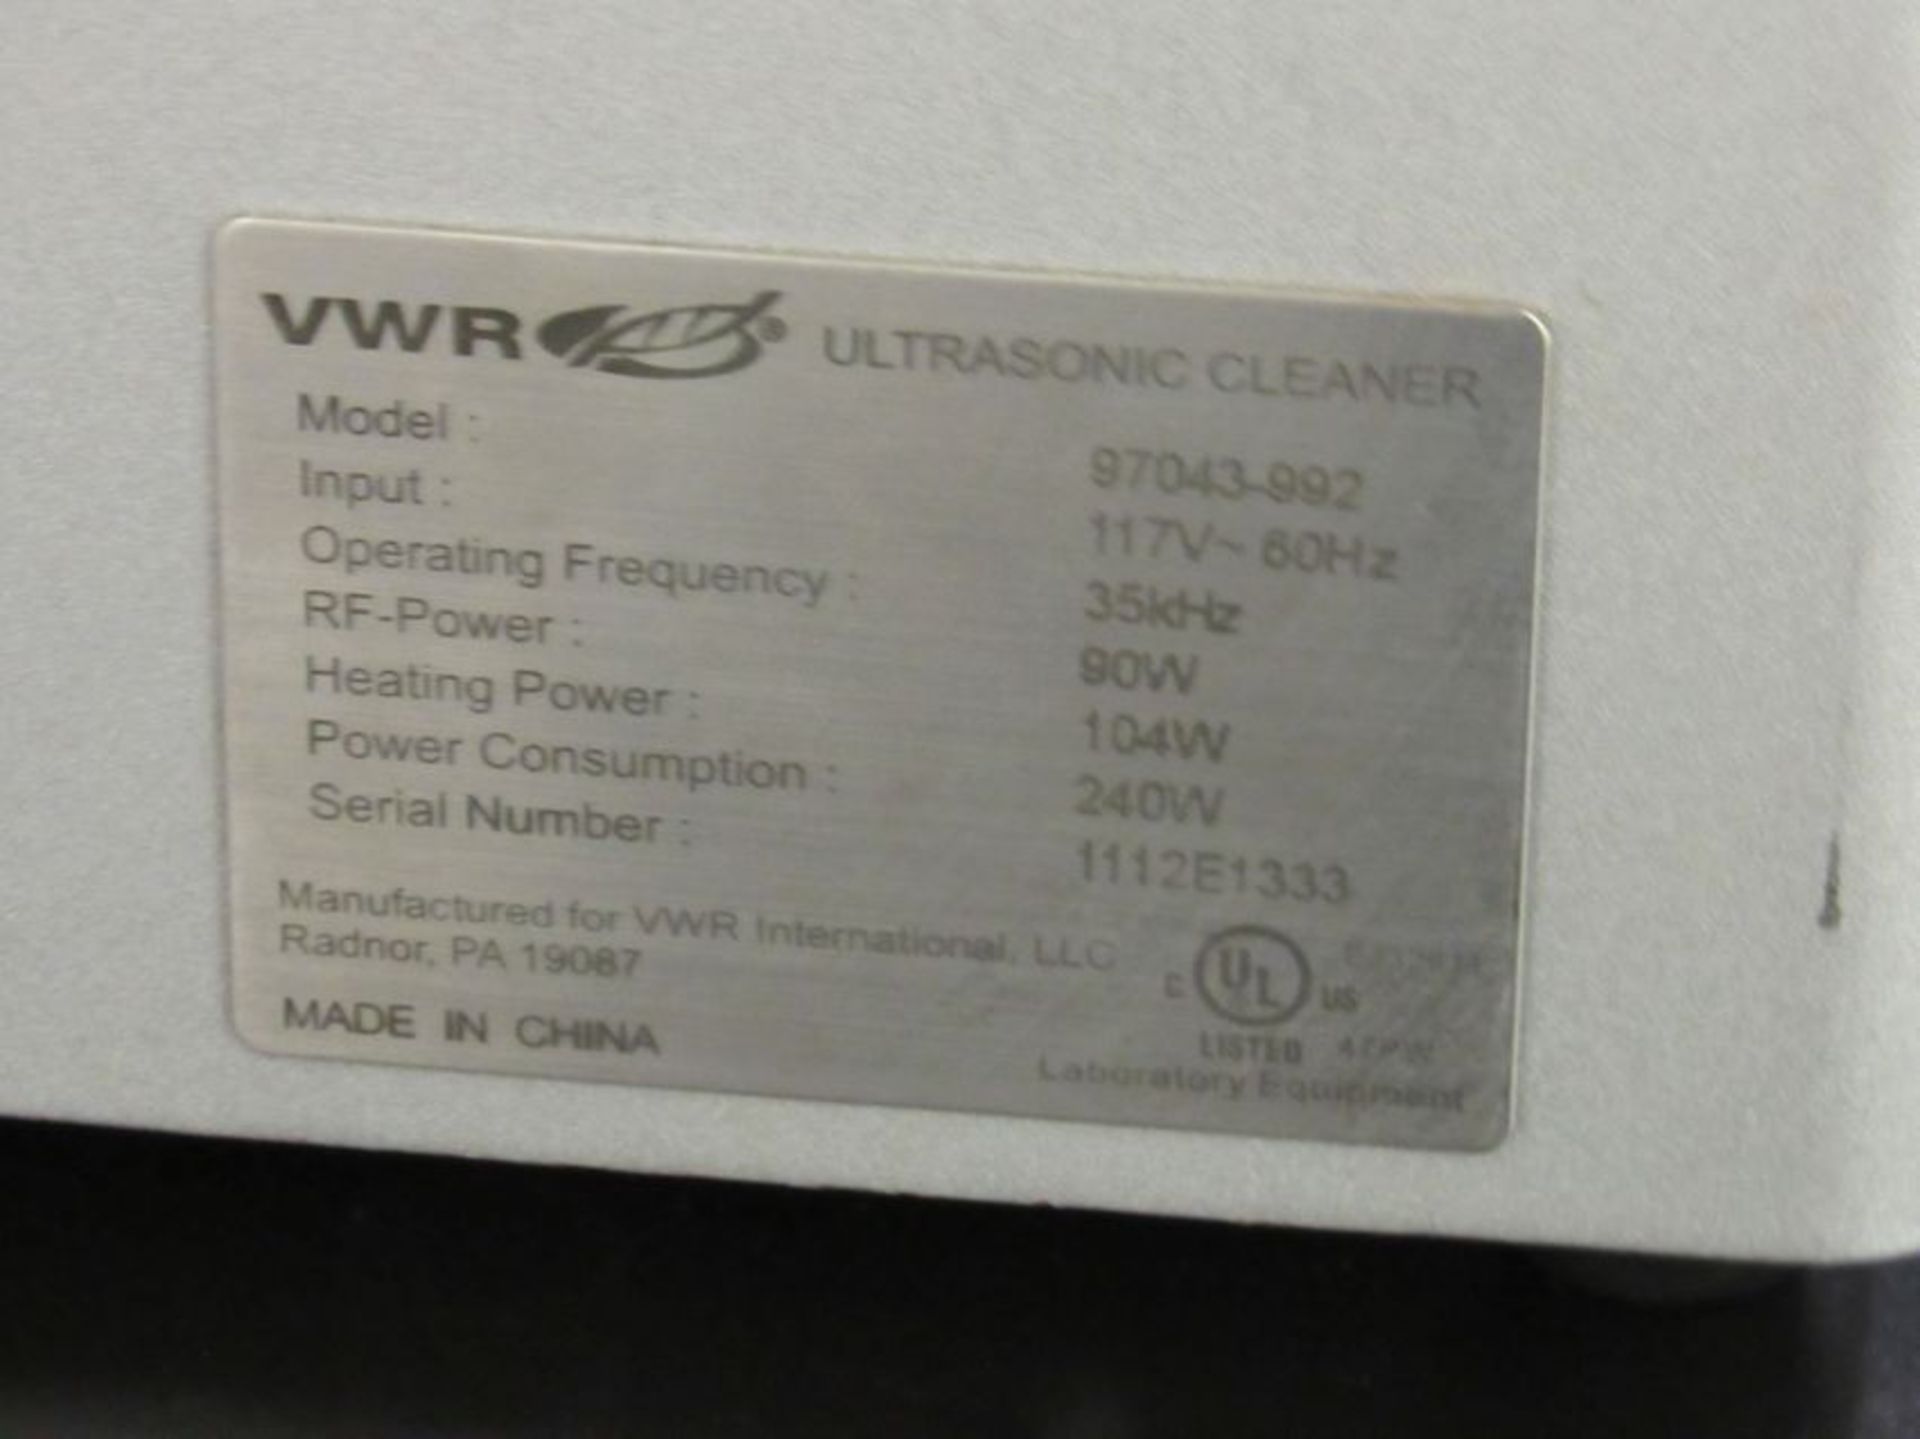 VWR Symphony Heated Sonicator Ultrasonic Cleaner. Model 97043-992, Serial No. 1112E1333. Removal and - Image 3 of 3